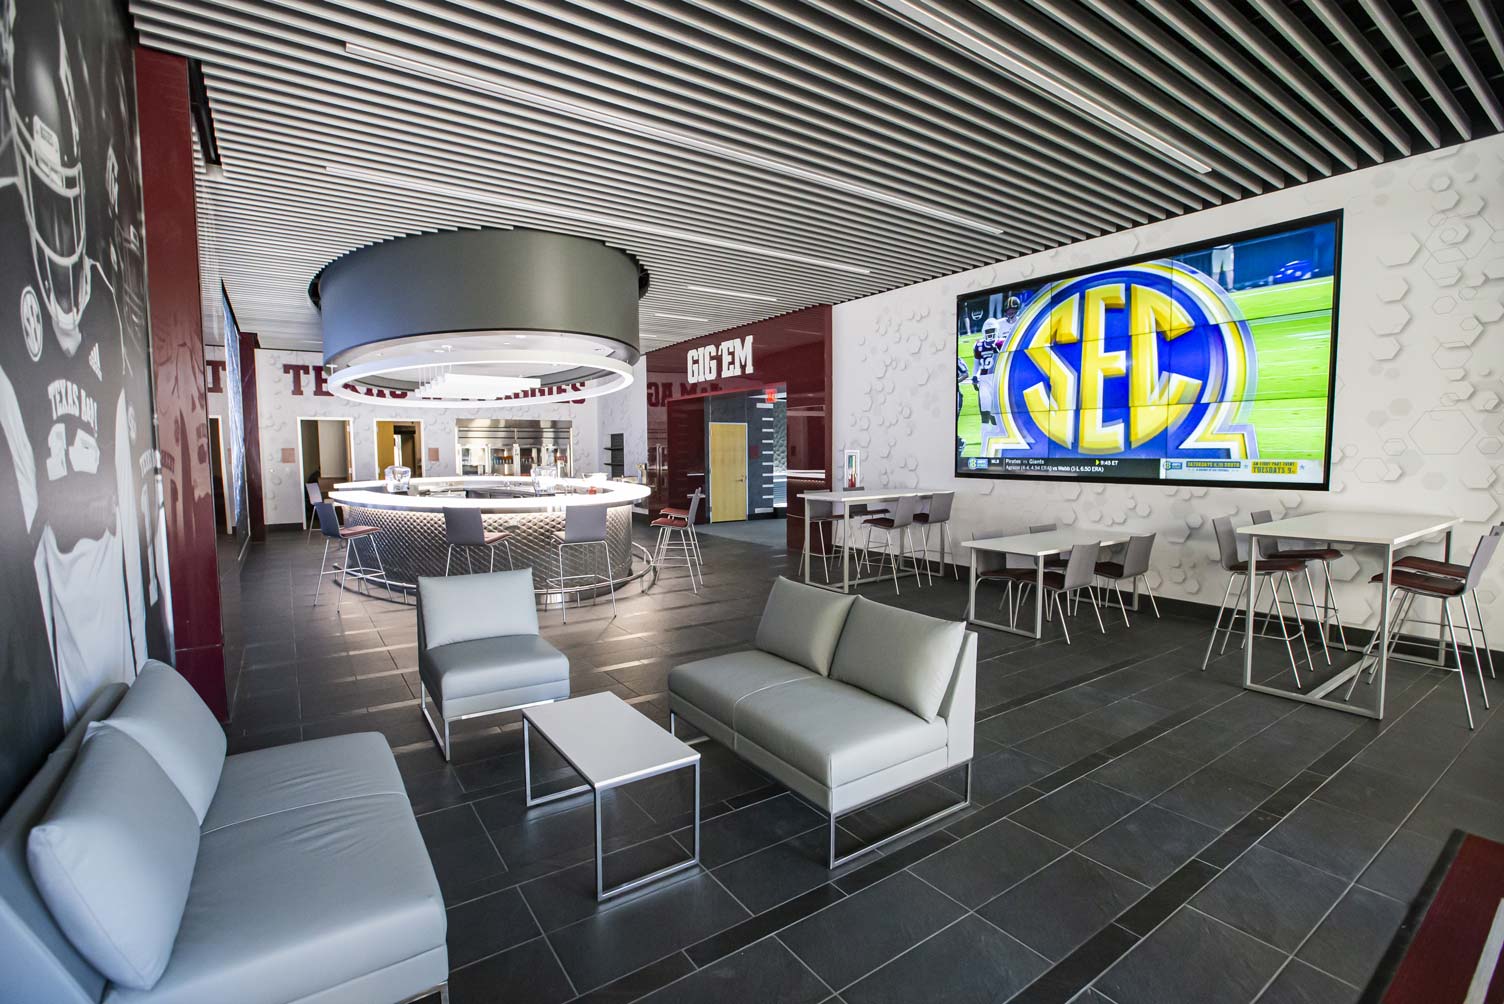 The lounge area of the Football Performance Nutrition building